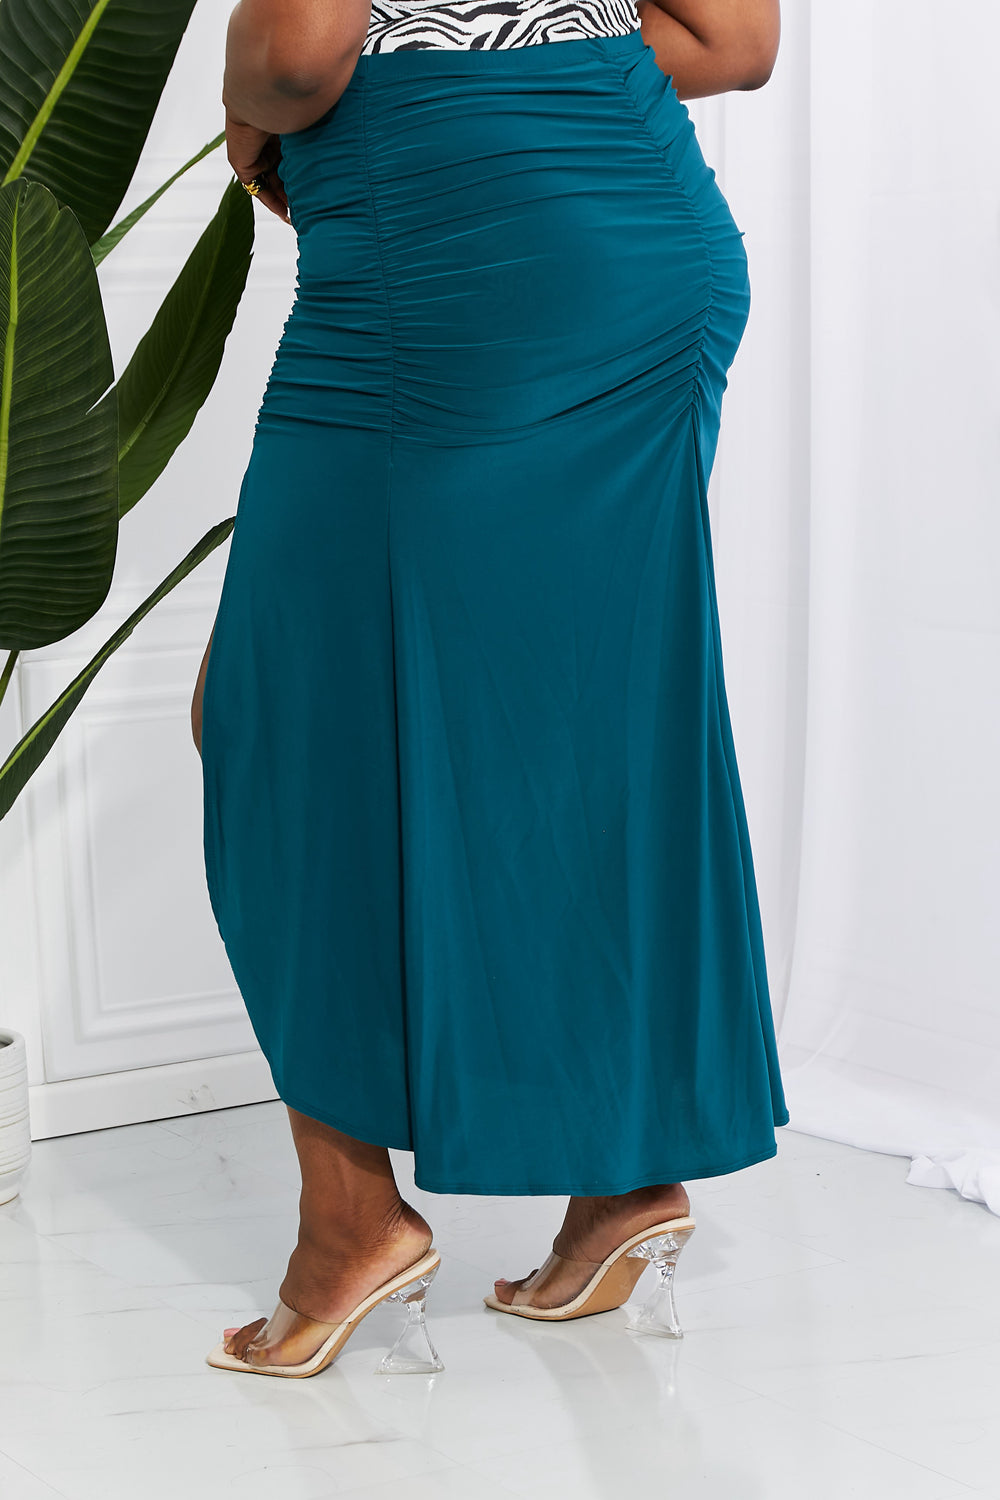 Full Size Up and Up Ruched Slit Maxi Skirt in Teal - Bottoms - Skirts - 7 - 2024